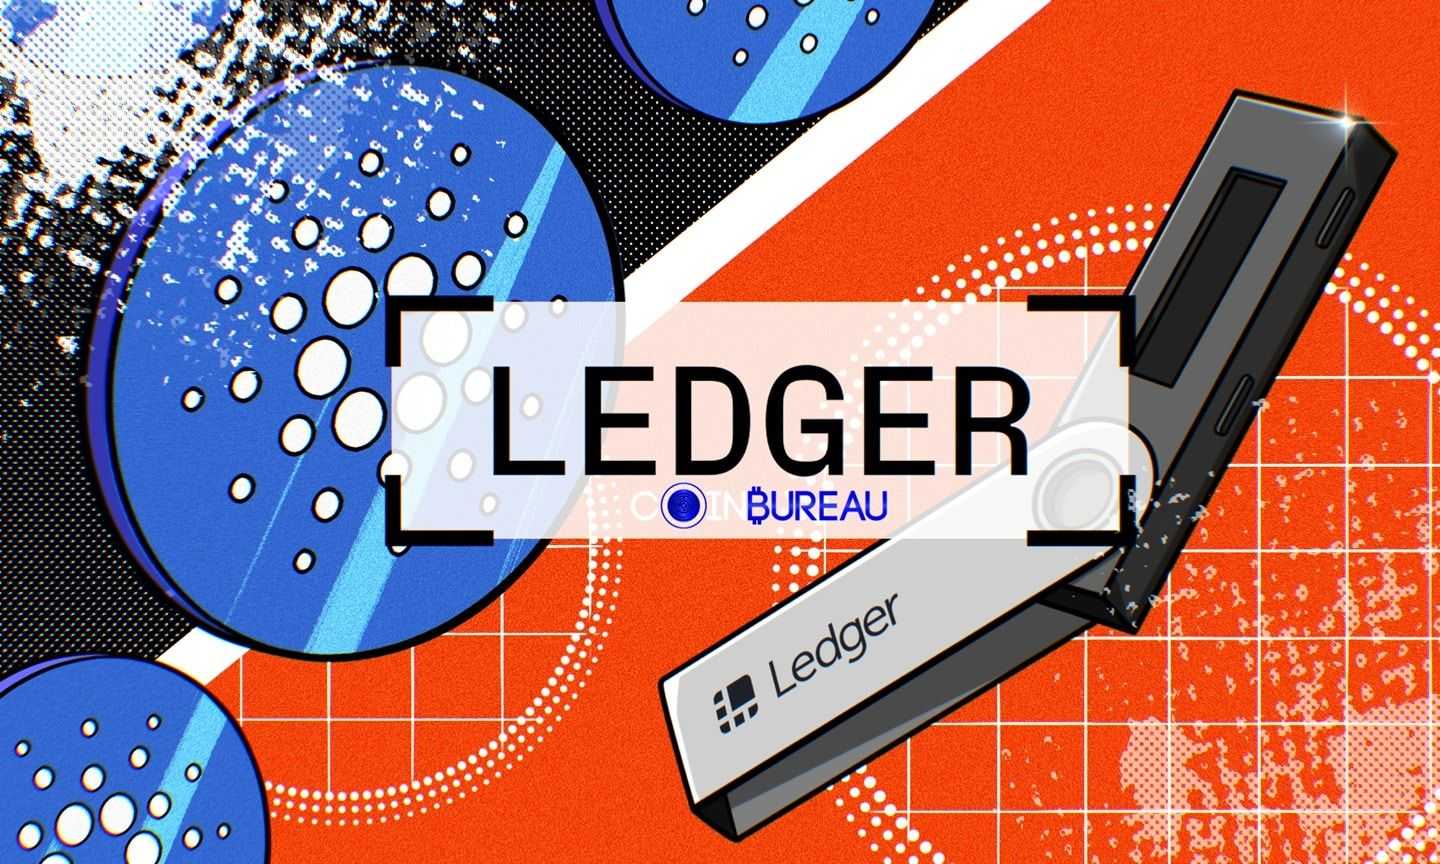 How to stake Cardano's ADA with Ledger Hardware Wallet